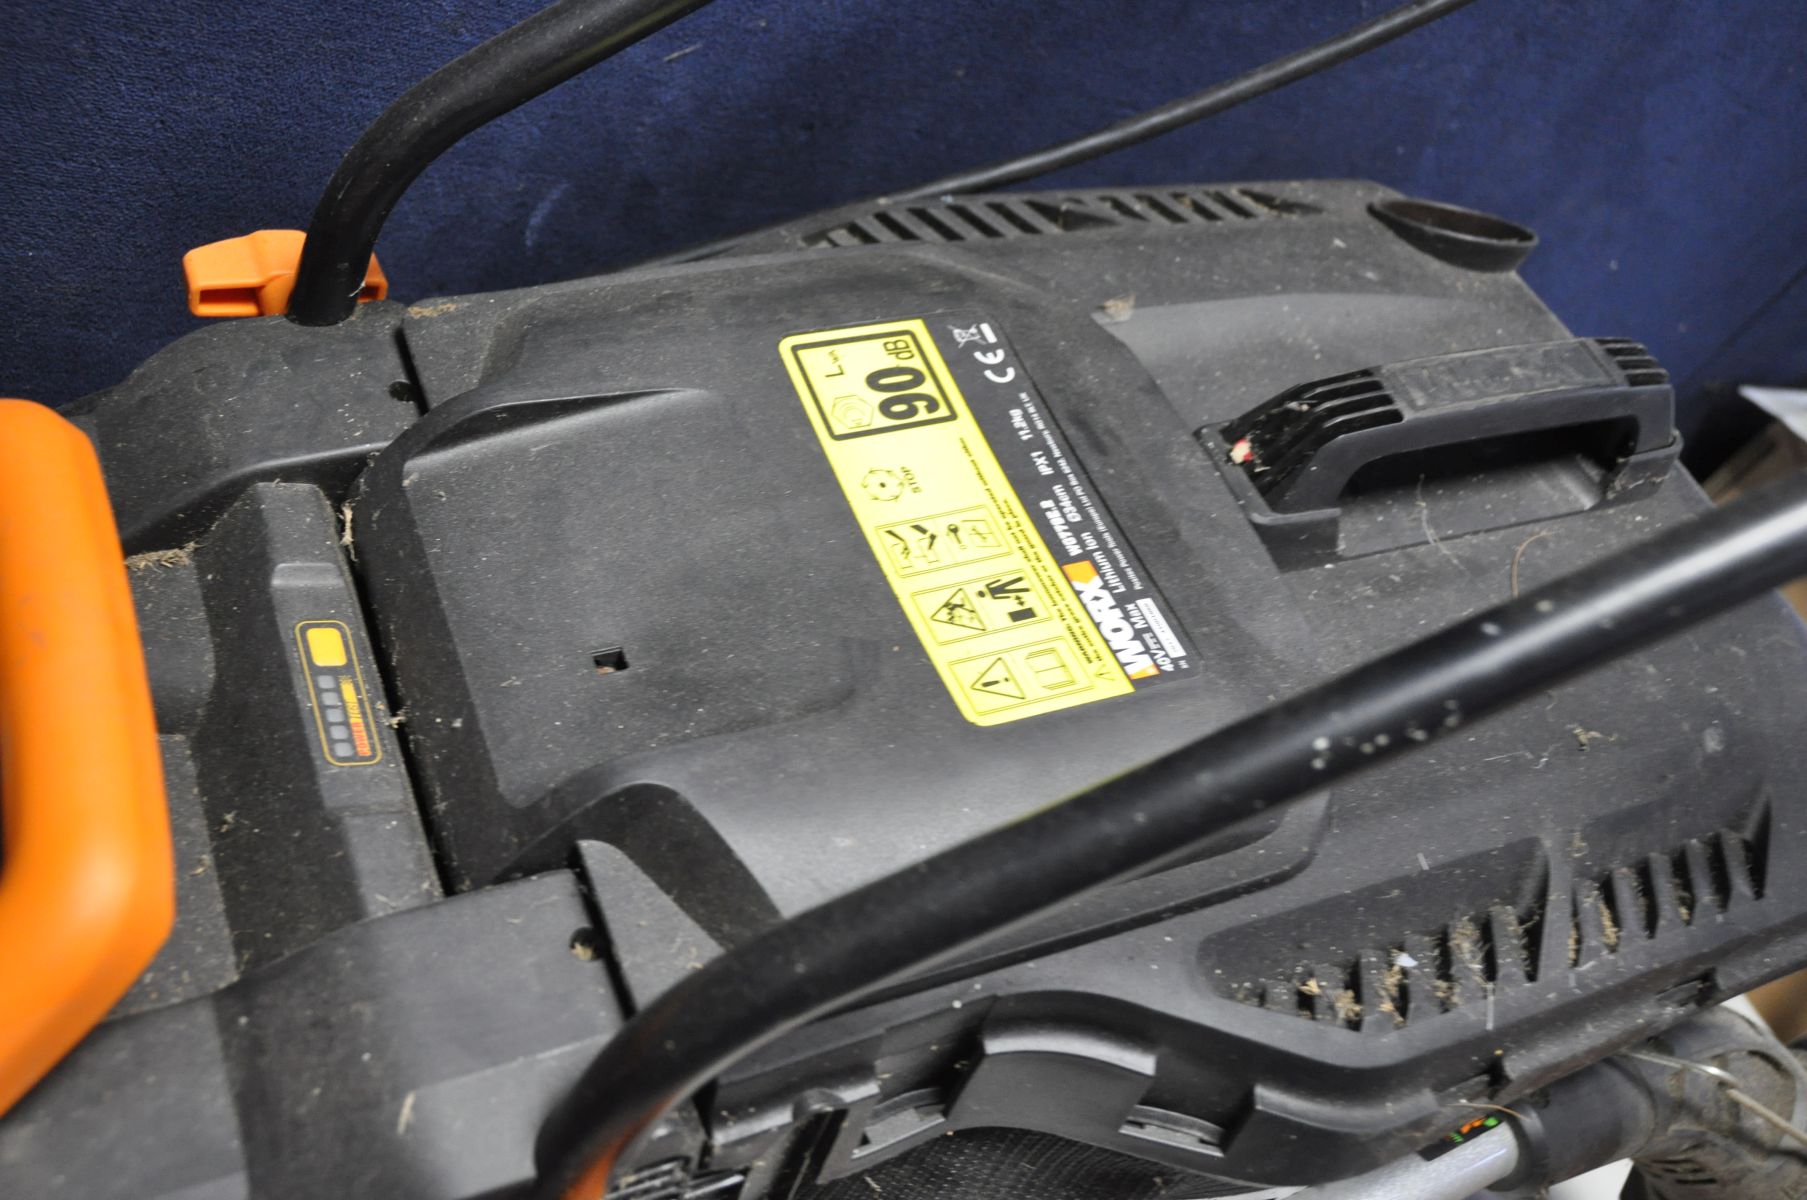 A WORX WG157E 20V STRIMMER and a Worx WG779E.2 40v lawn mower (two batteries and charger PAT pass - Image 3 of 3